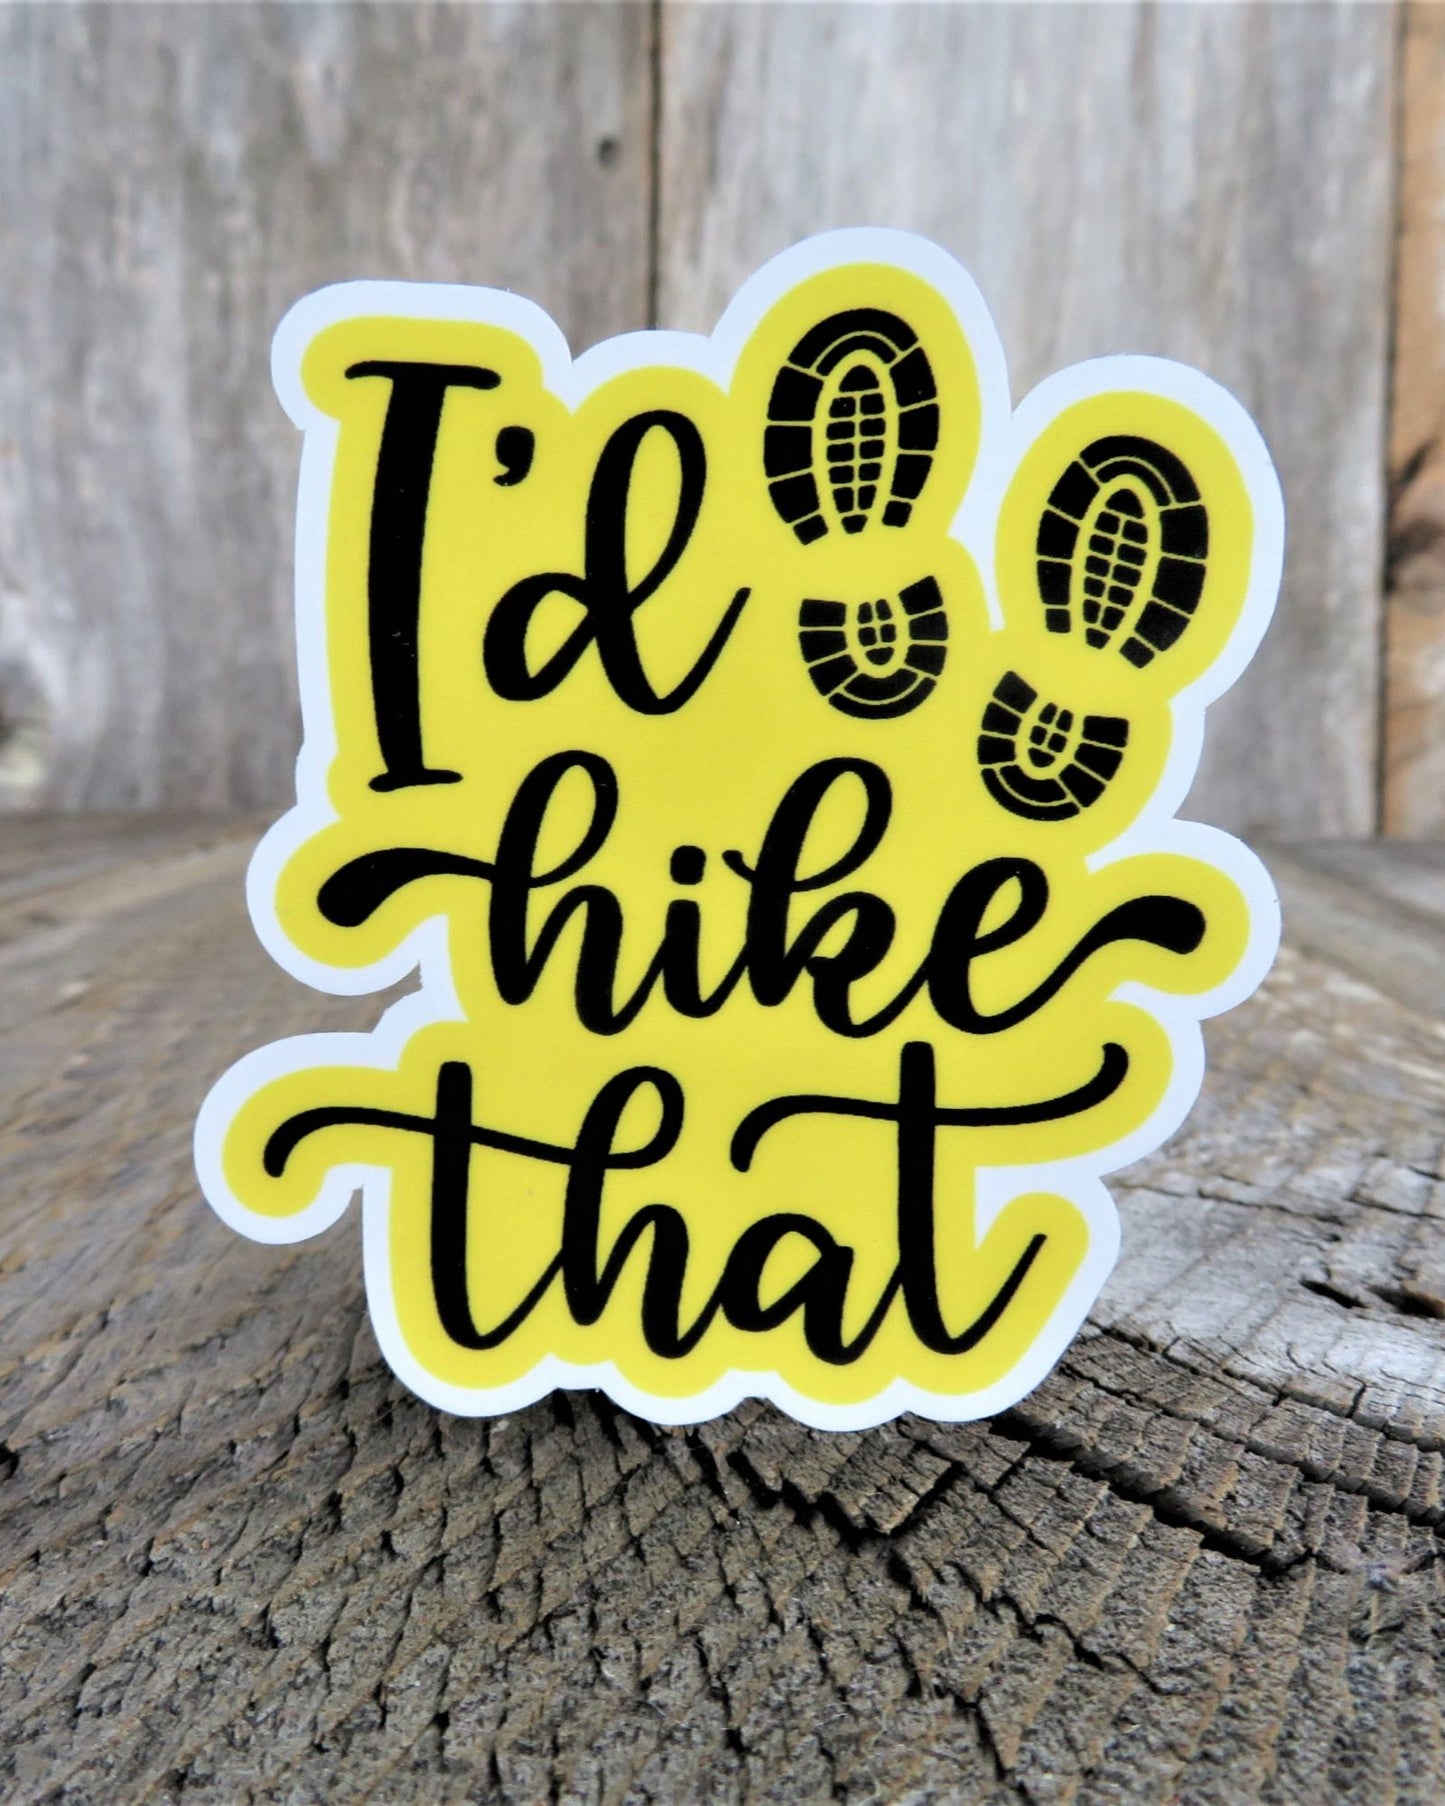 Hiking Sticker I'd Hike That Yellow Boot Print Full Color Waterproof Car Water Bottle Laptop